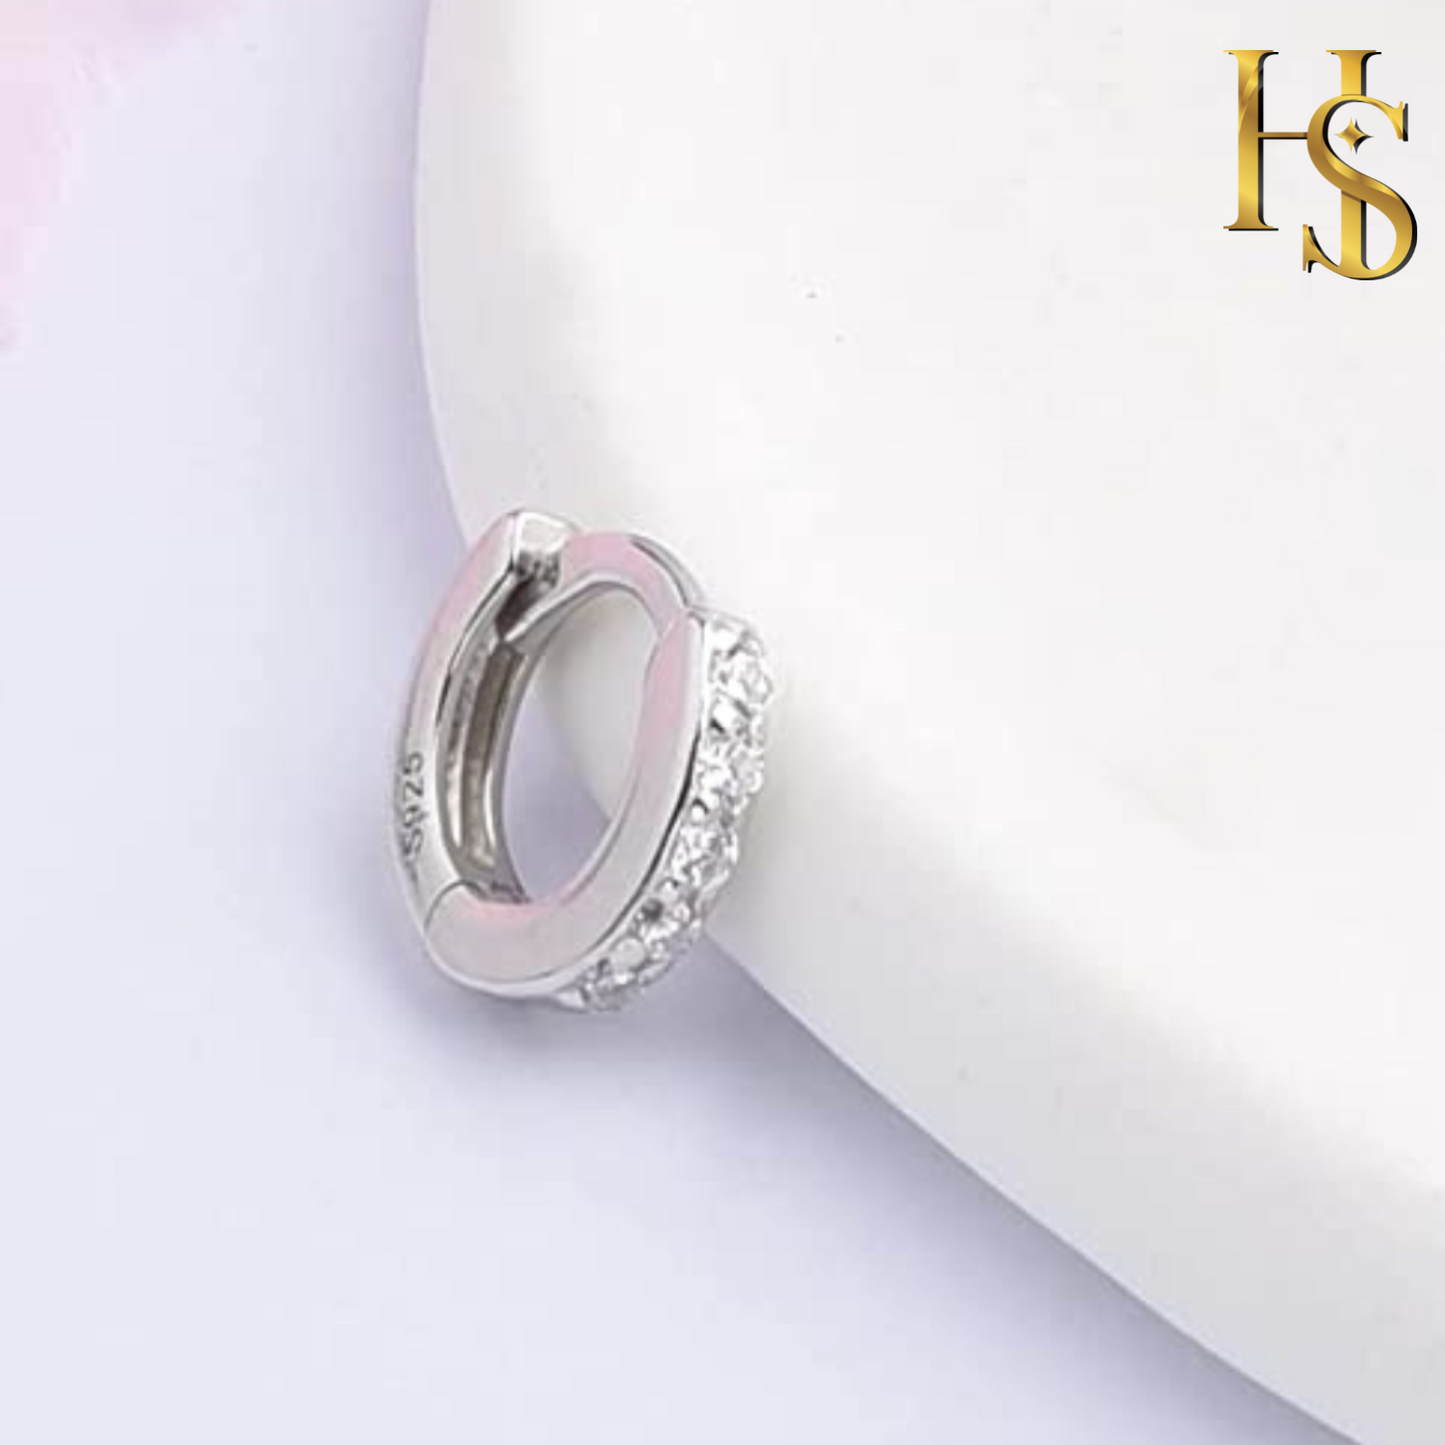 Studded Nose Ring in 92.5 Sterling Silver - Elegant Septum Ring / Nose Pin / Silver Nath